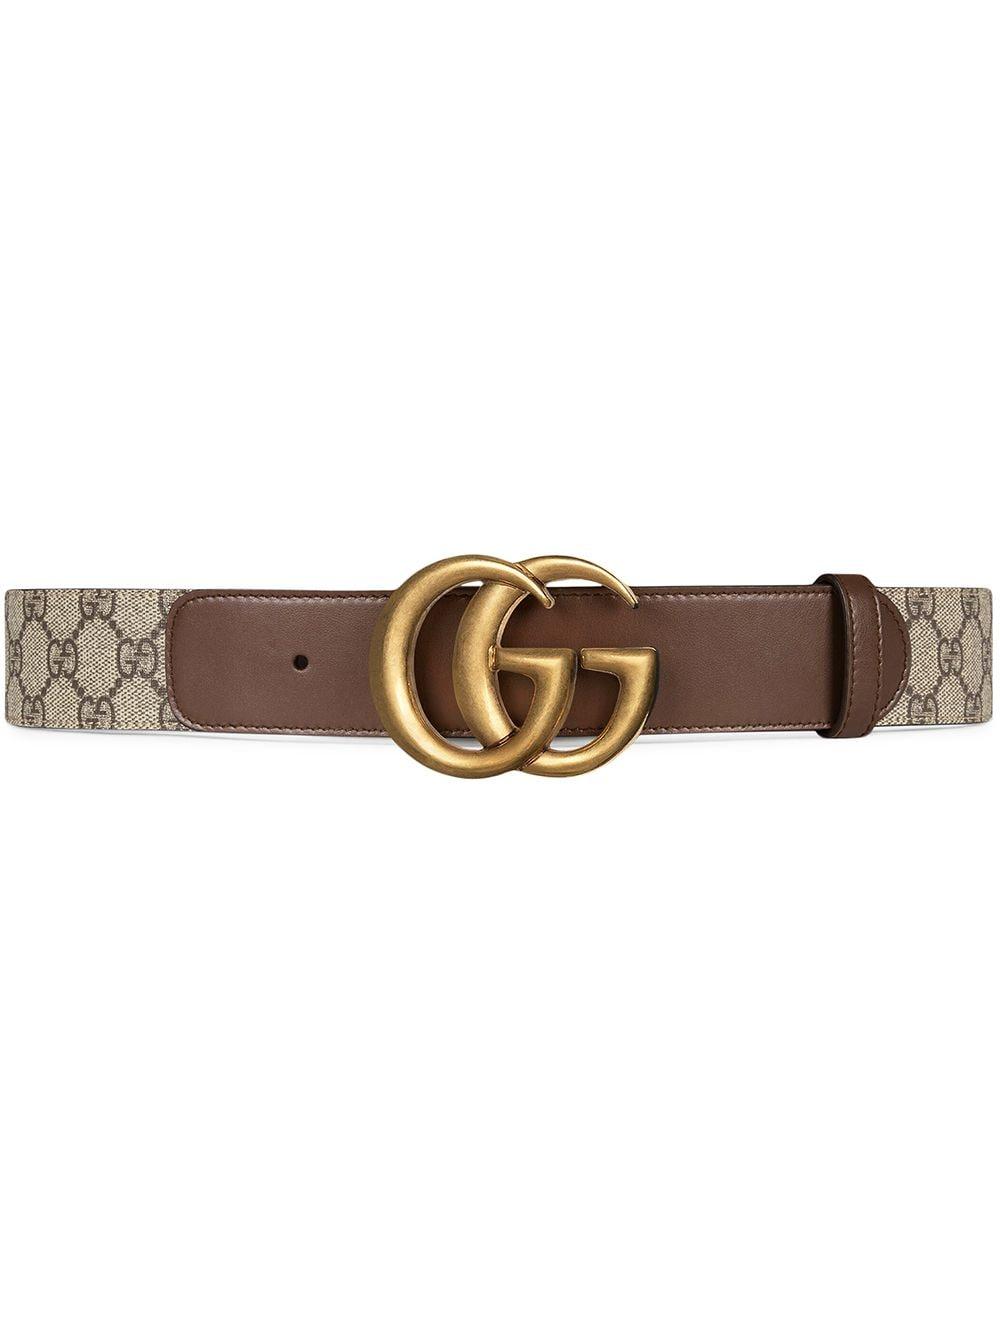 Gucci GG Belt With Double G Buckle in Brown | Lyst